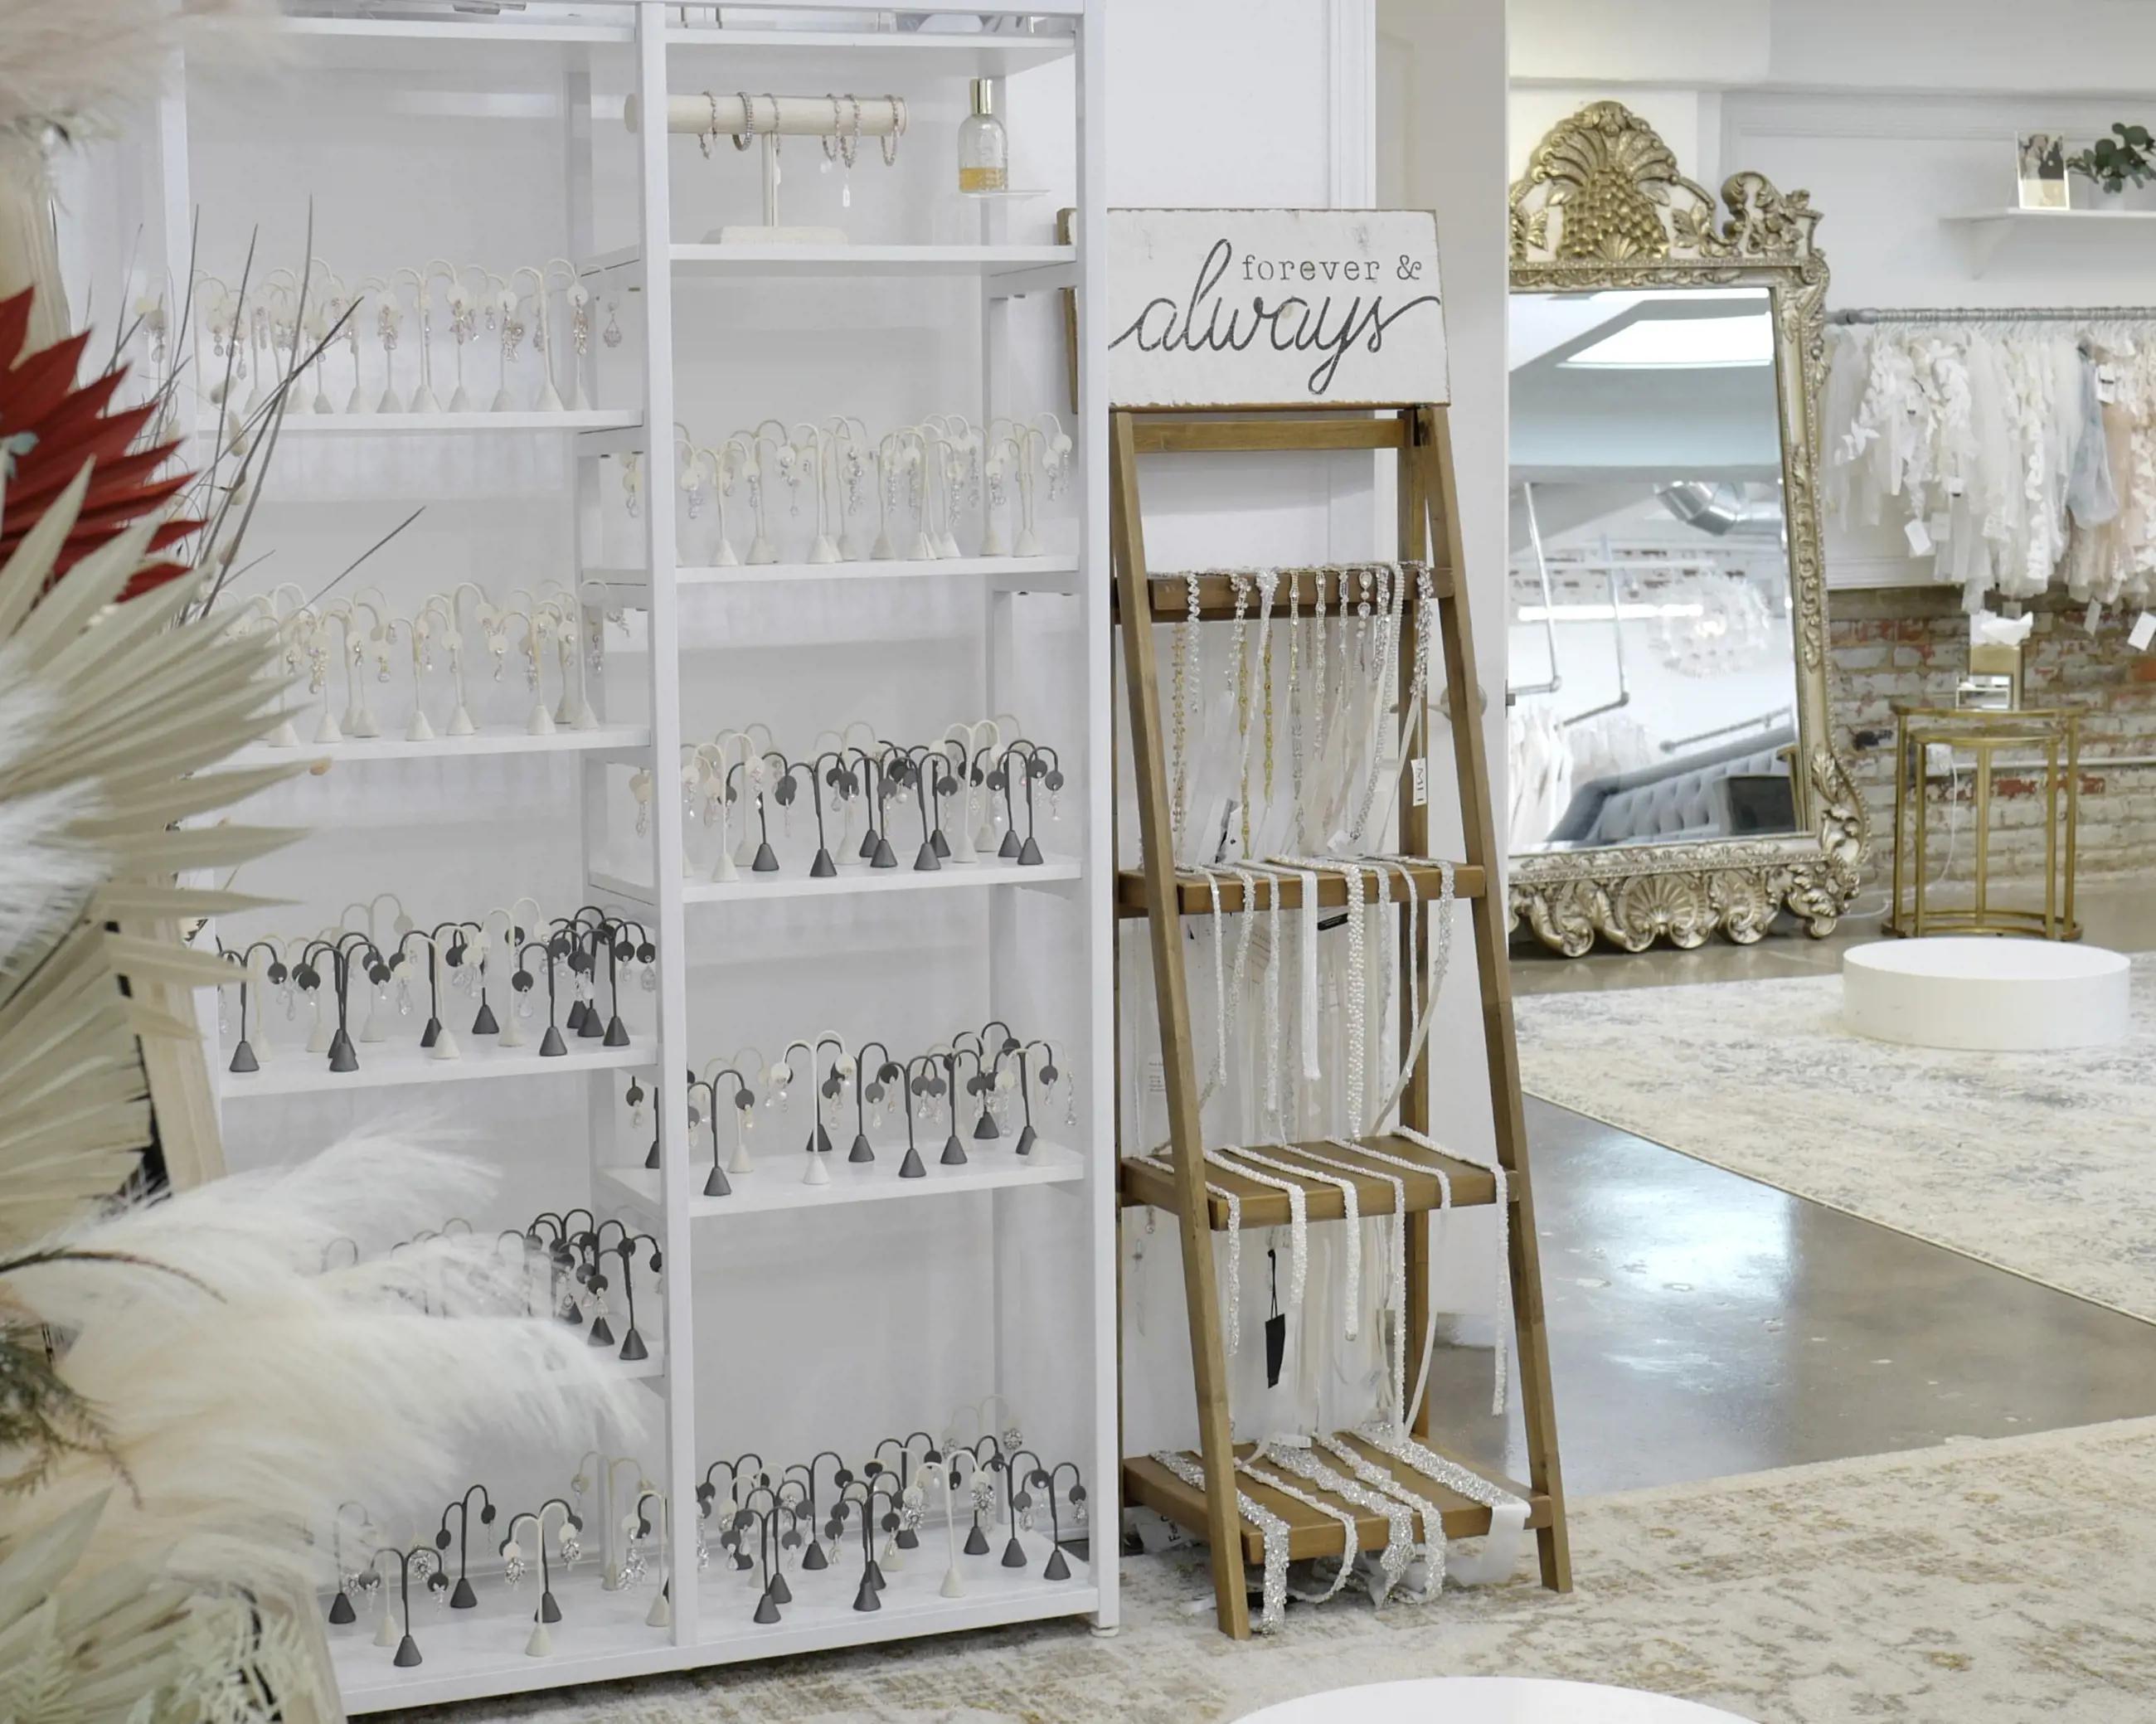 Display of accessories such as belts, earrings, and necklaces at Liliana Bridal House